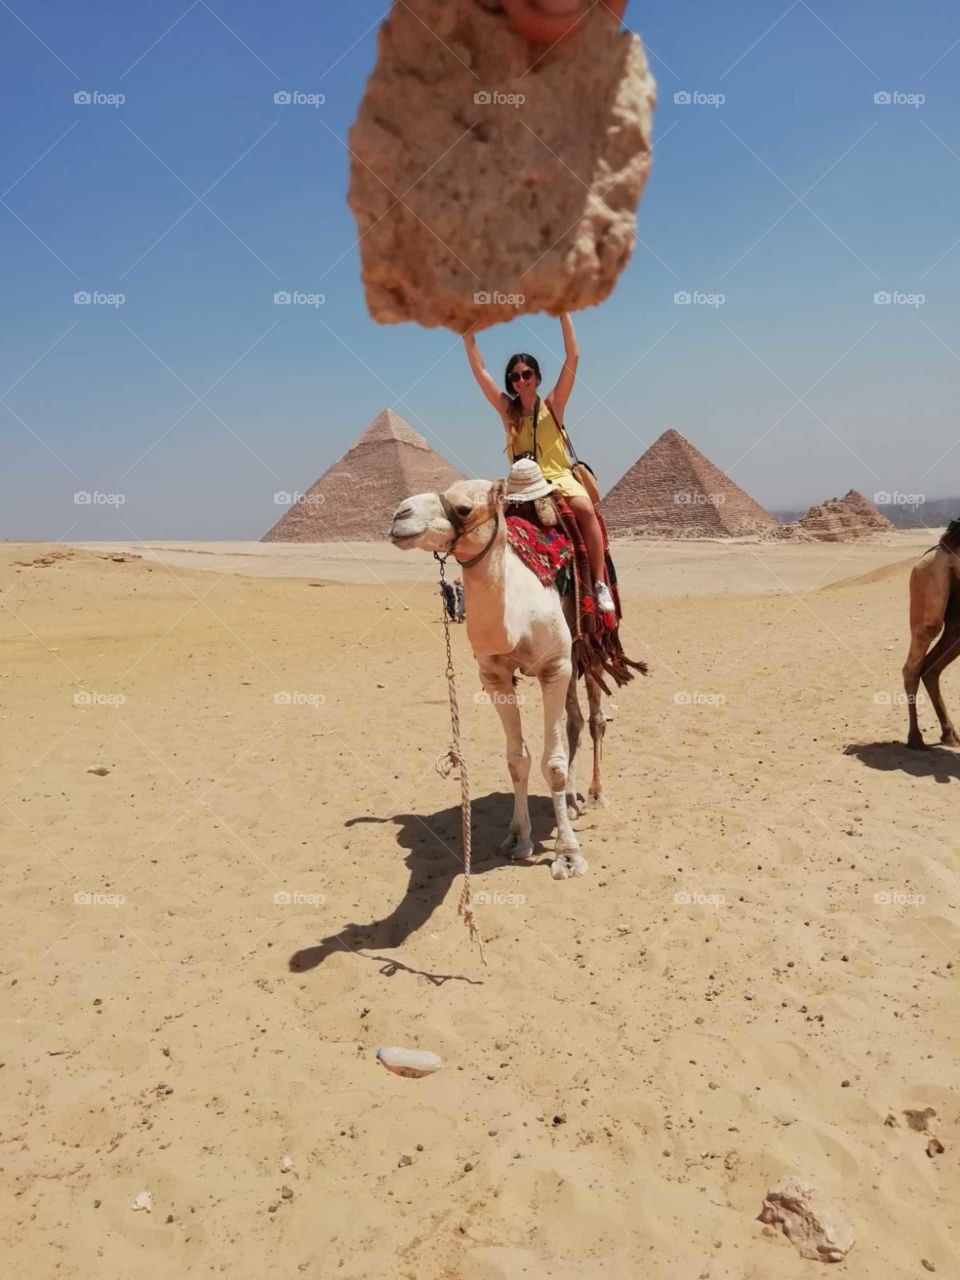 lovely photo with background panorama view pyramids very natural color and beautiful photo.